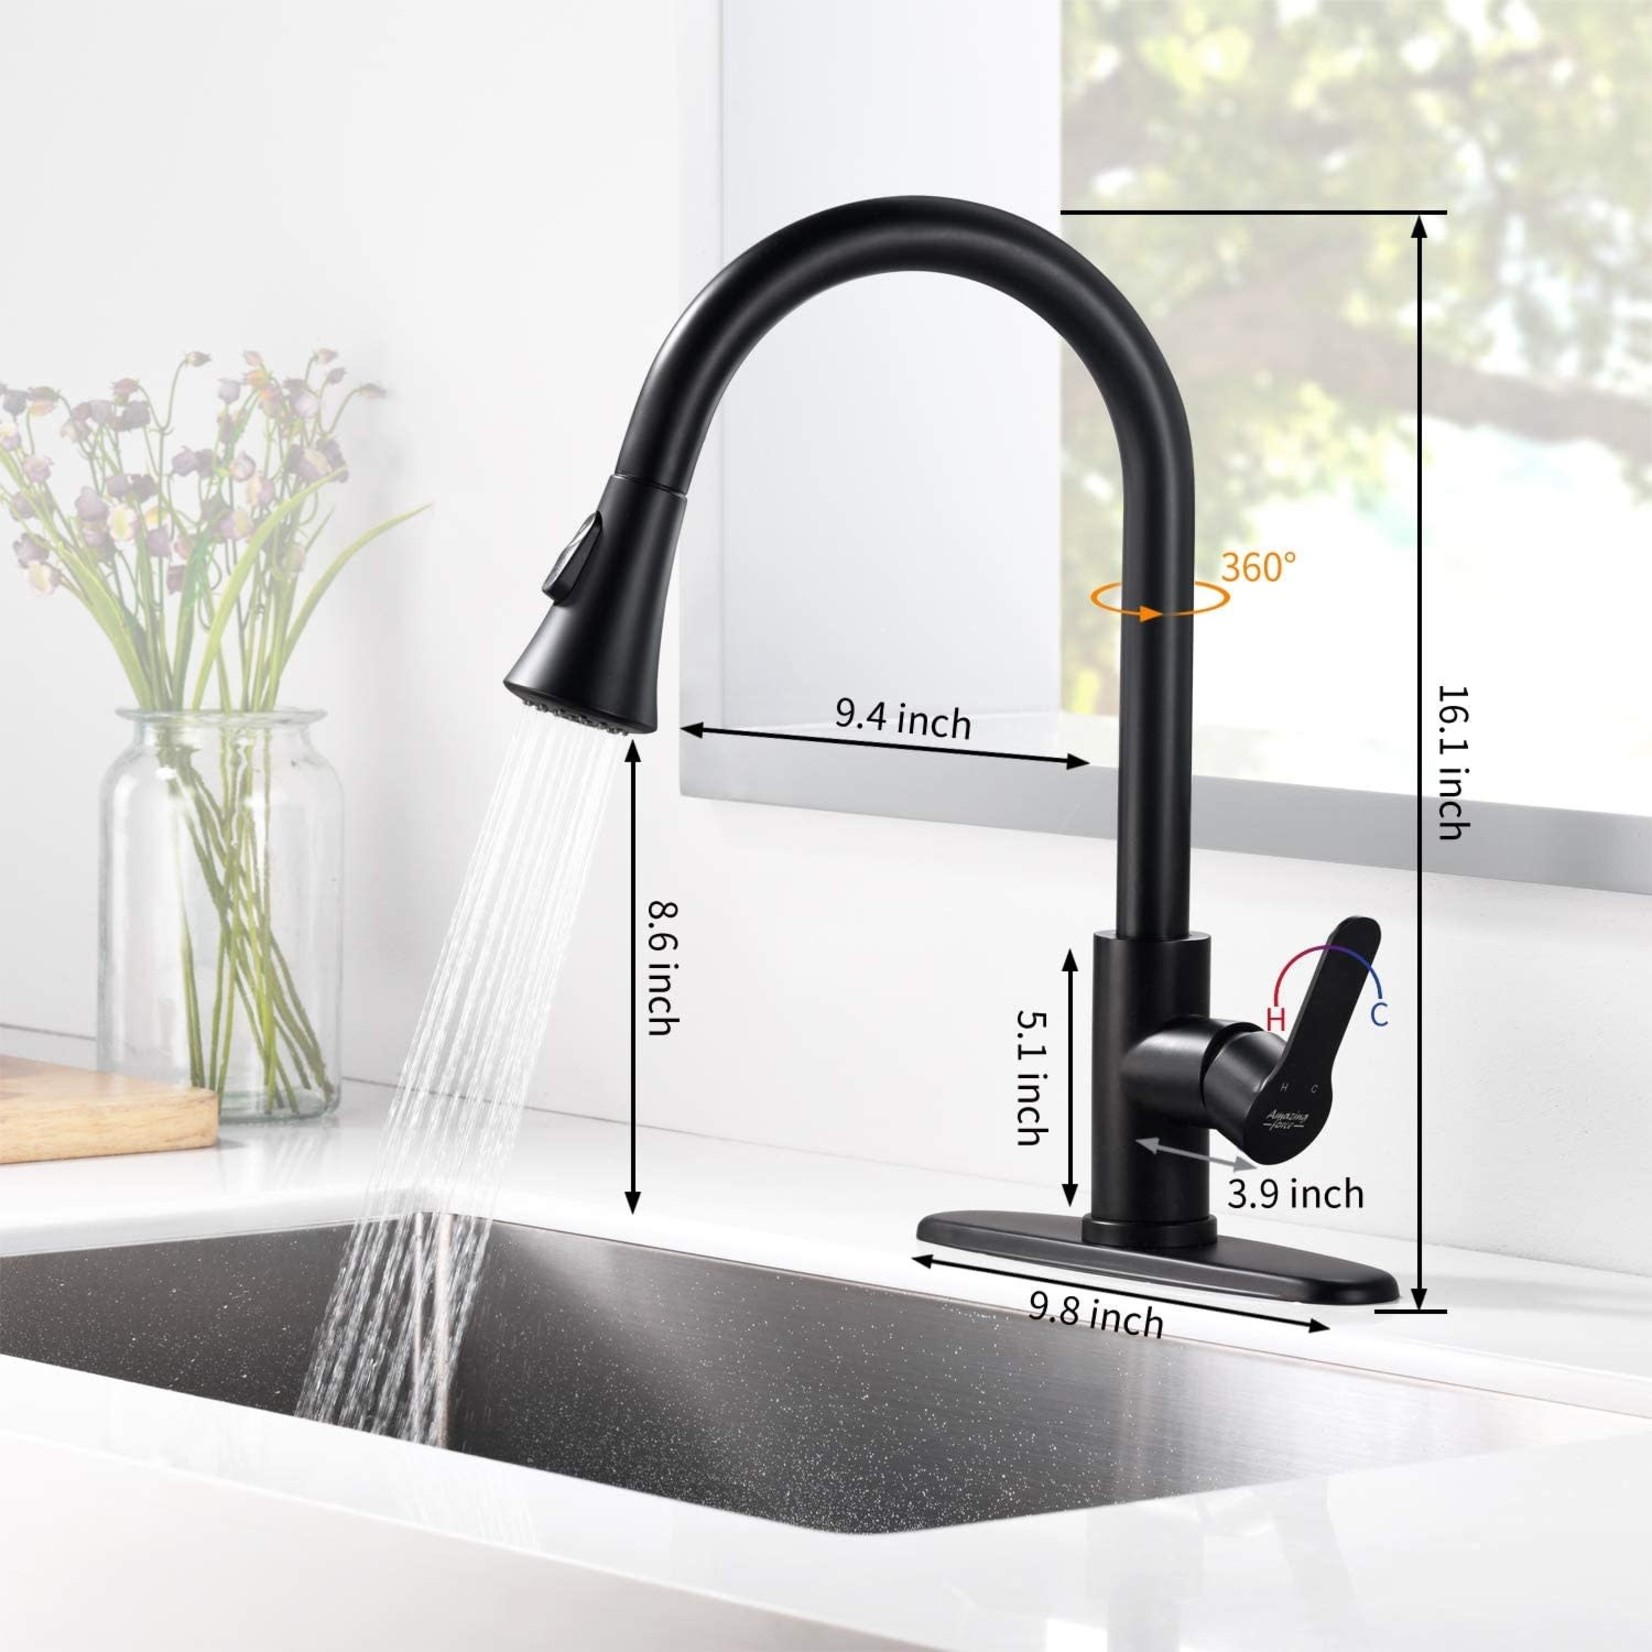 Amazing Force Modern Kitchen Faucet